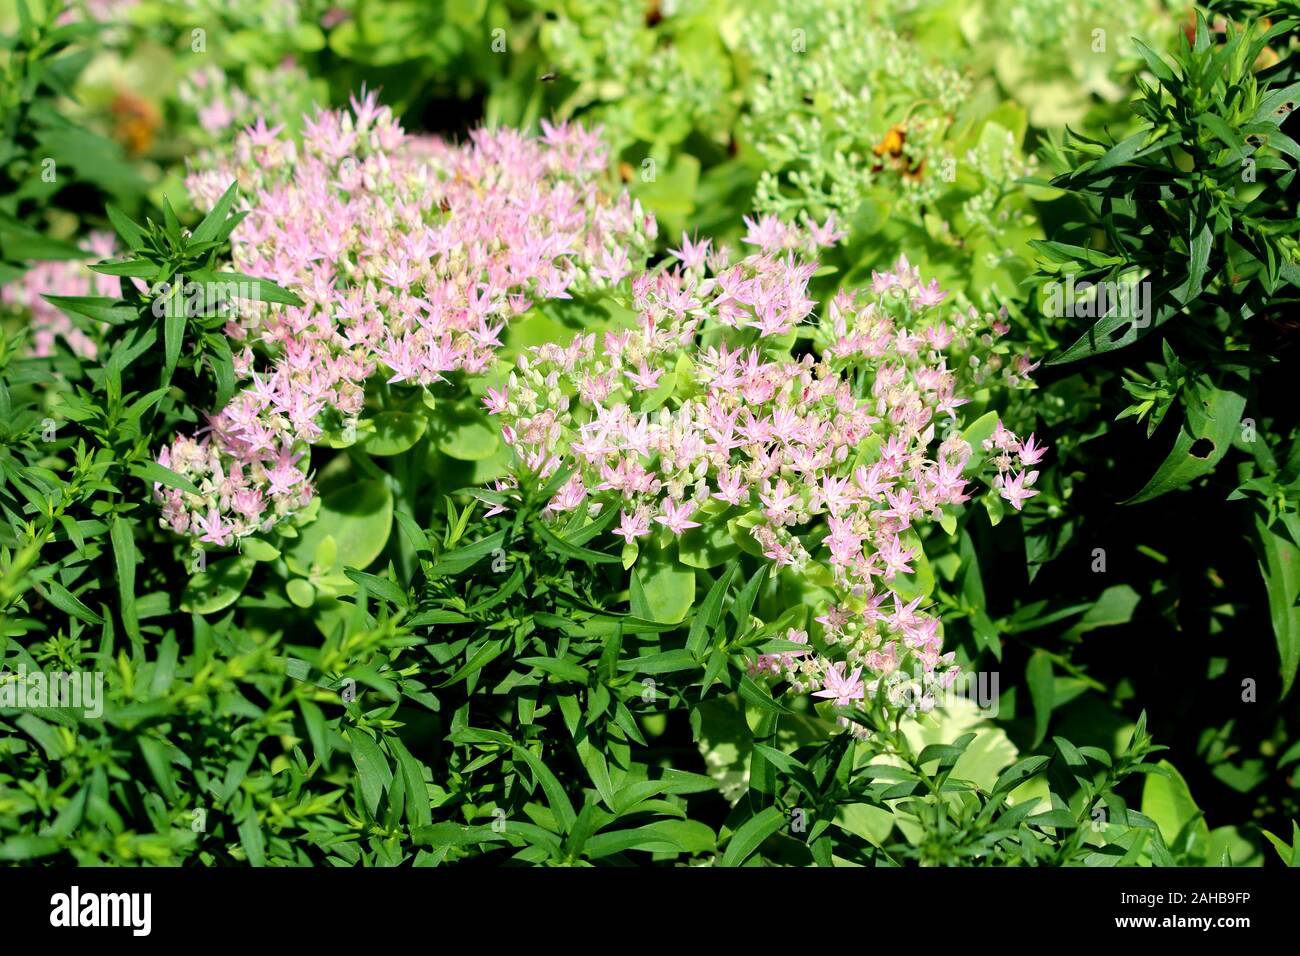 Sedum or Stonecrop hardy succulent ground cover perennial plants with densely growing open blooming small star shaped light pink flowers planted Stock Photo